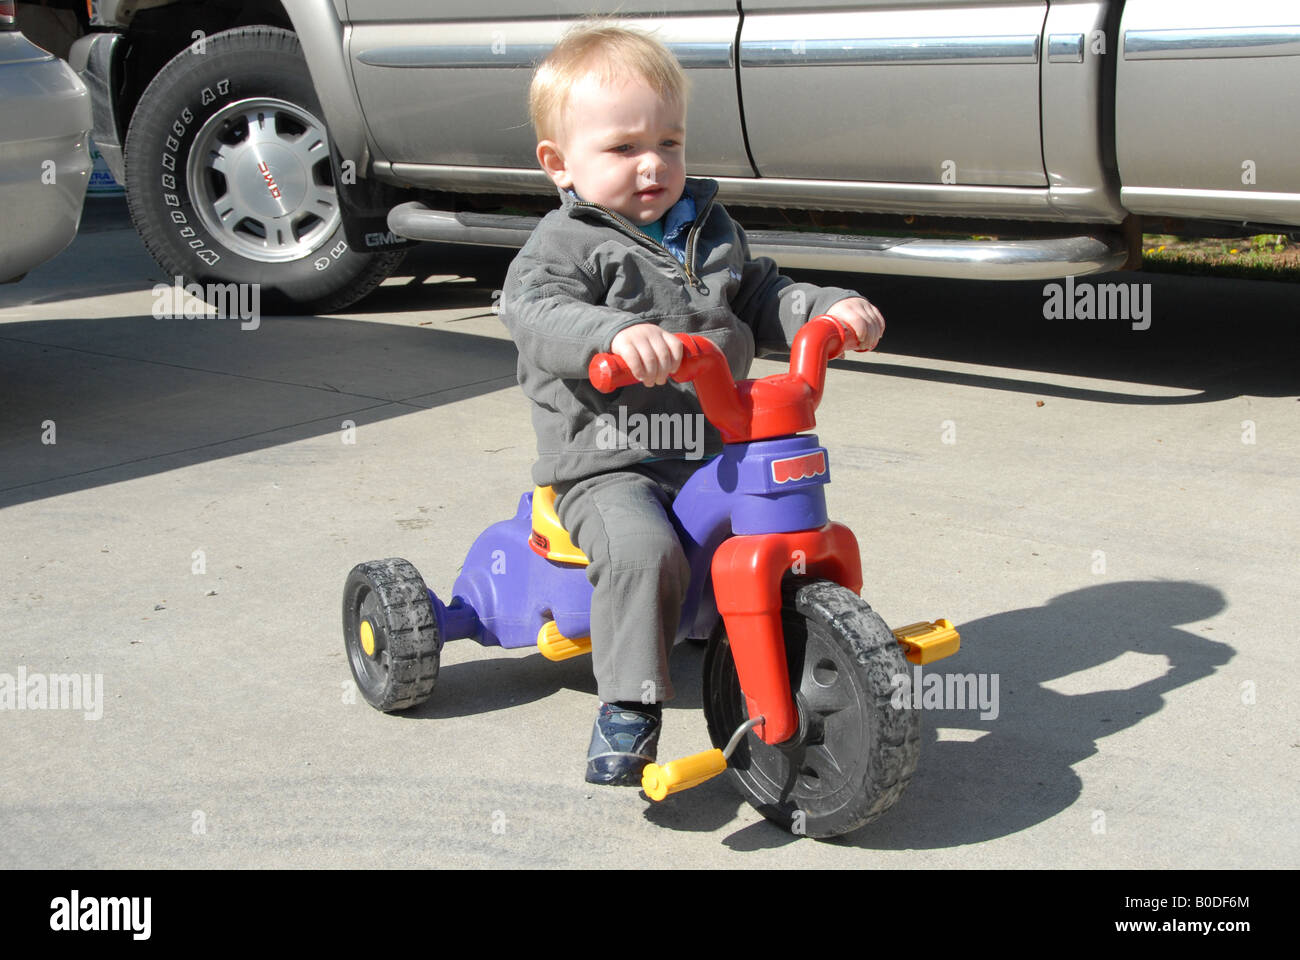 A toddler boy rides a tricycle outside on the pavement on a sunny day. Stock Photo